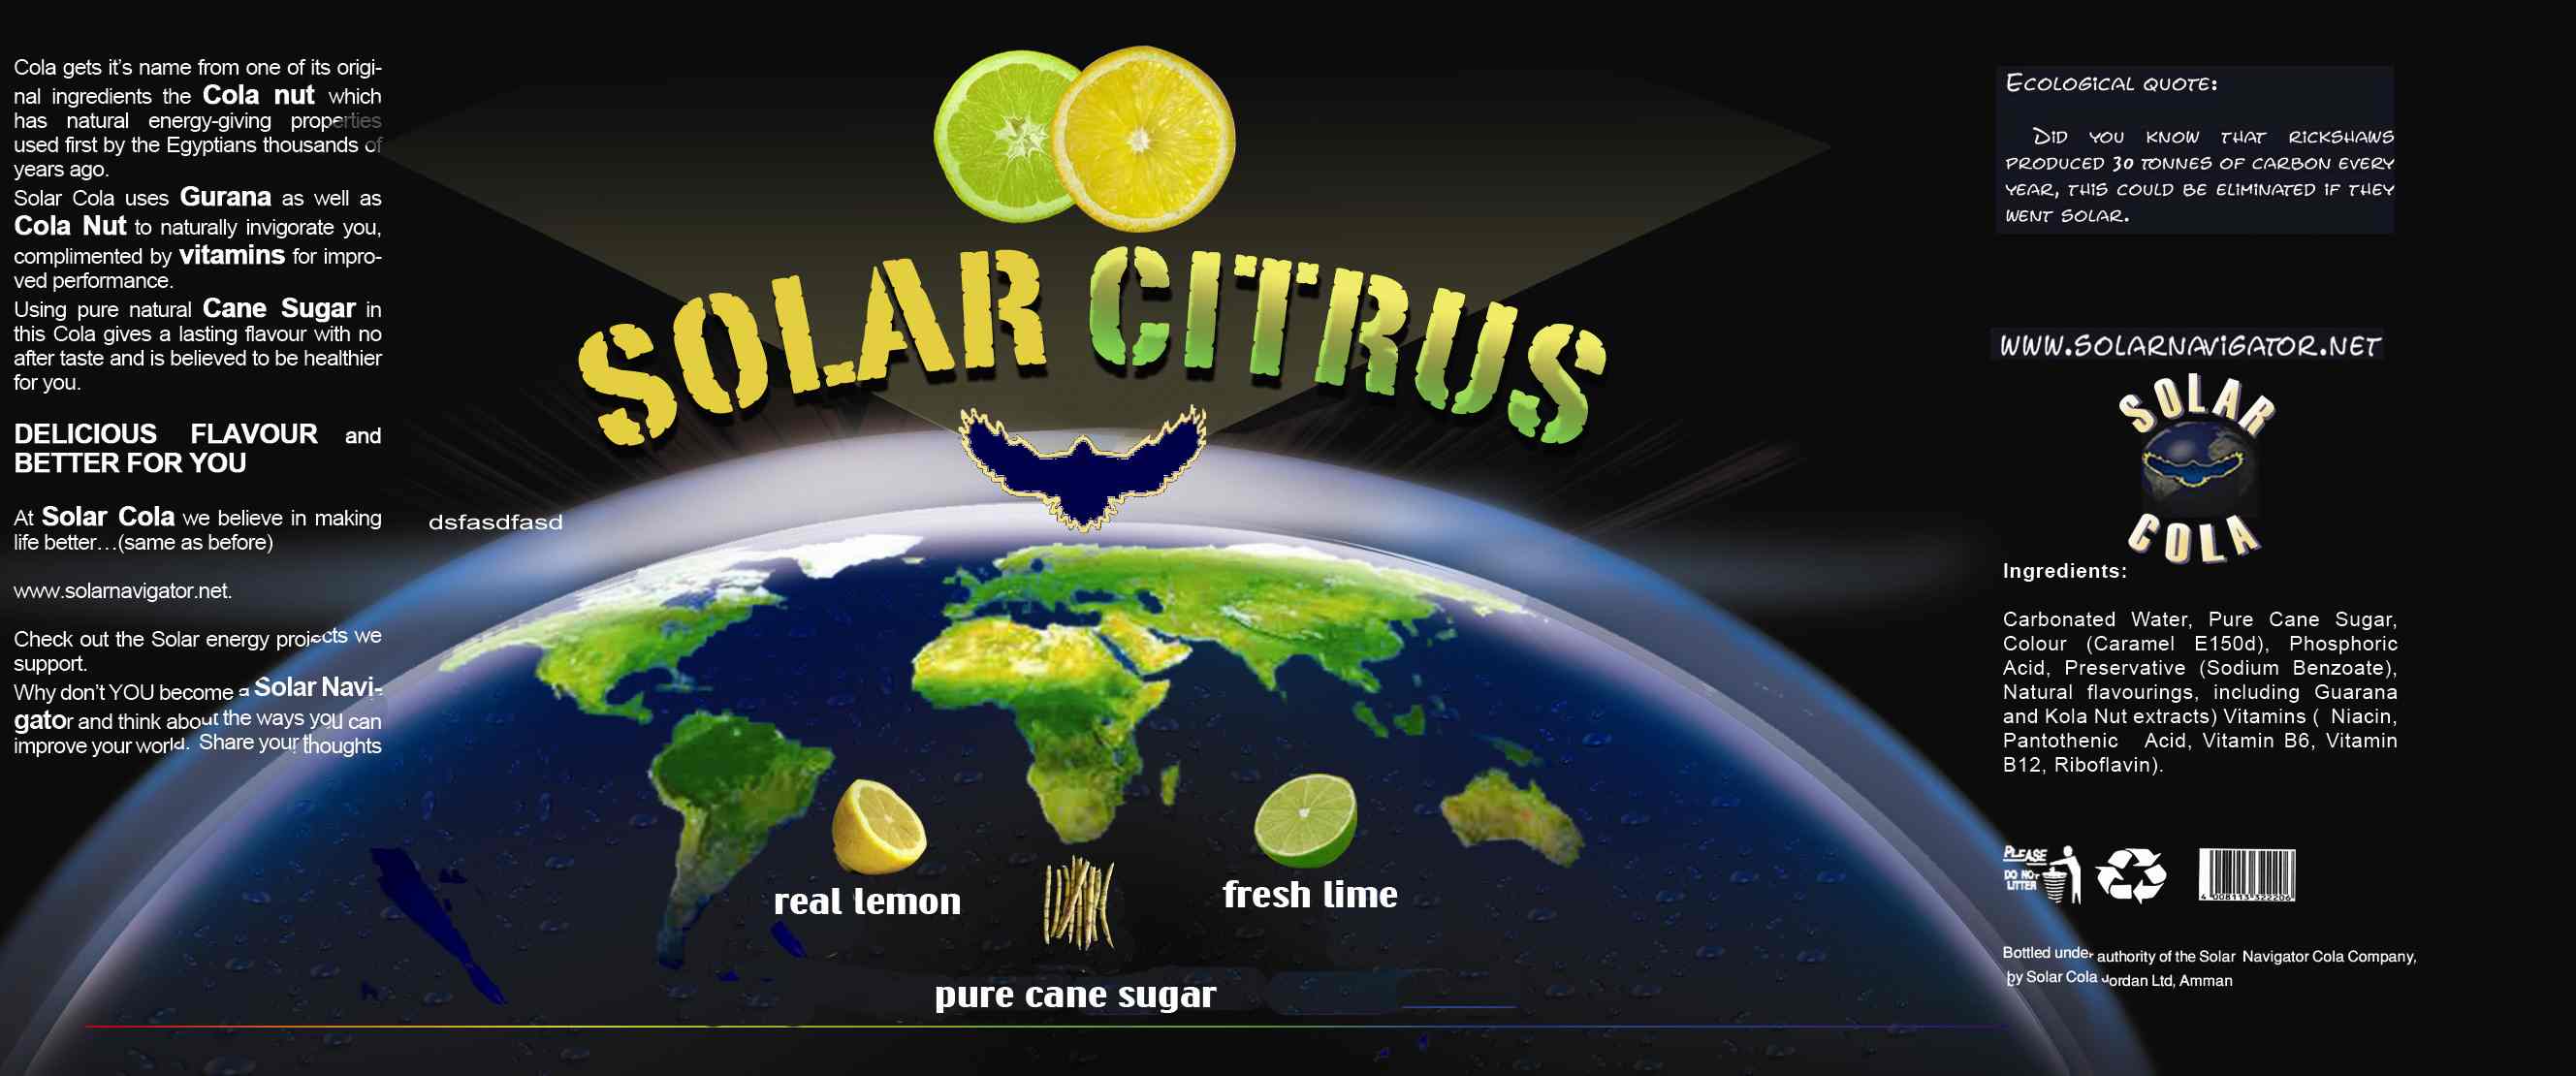 Solar Citrus 330ml can label, natural lemon and lime flavour drink with pure cane sugar